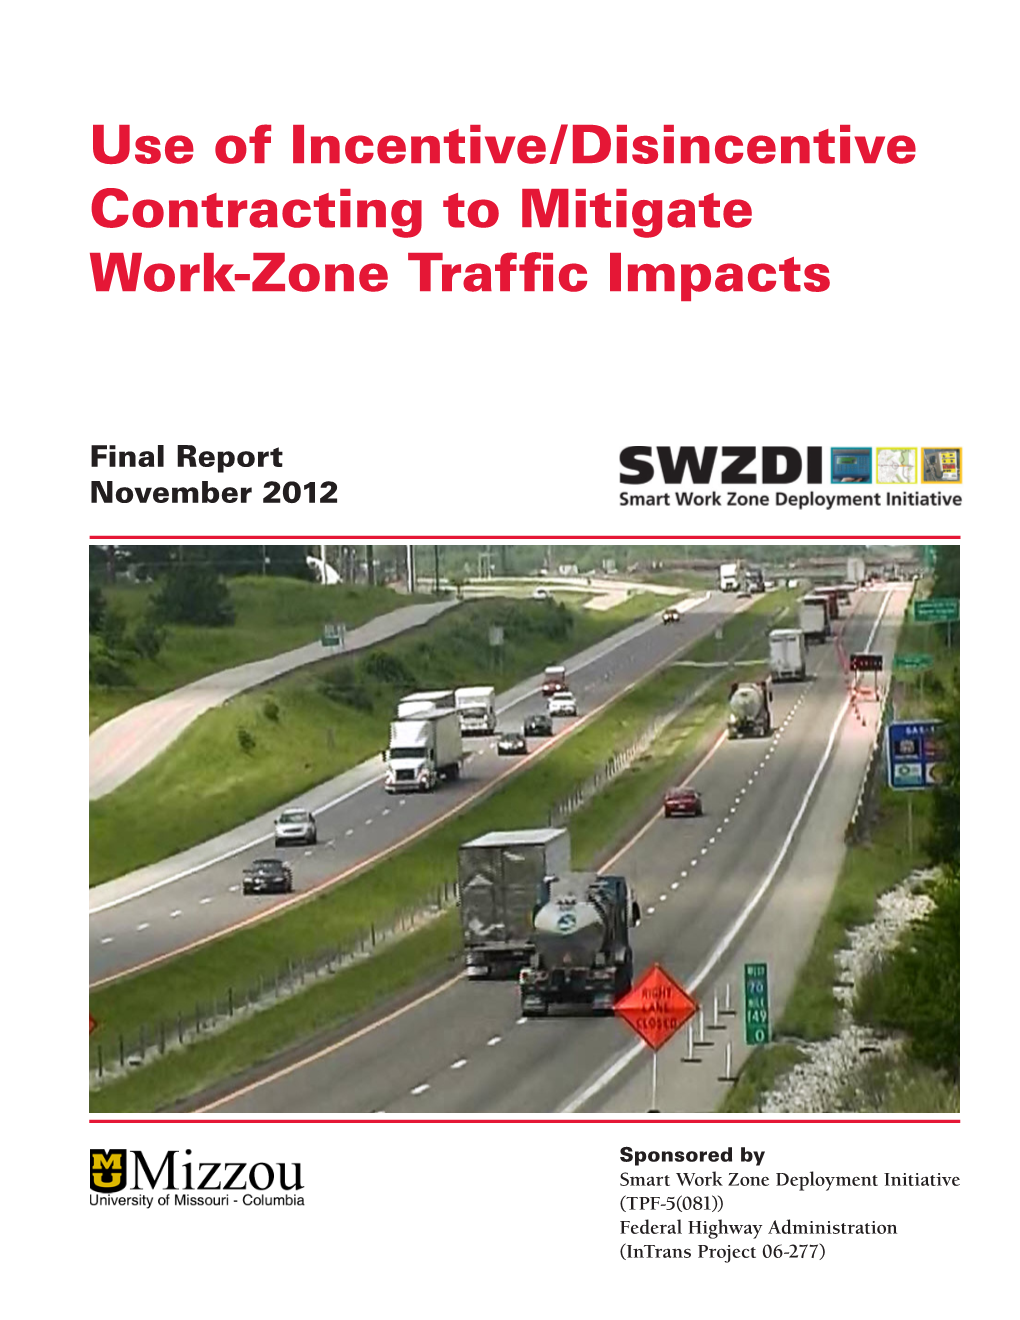 Use of Incentive/Disincentive Contracting to Mitigate Work-Zone Traffic Impacts